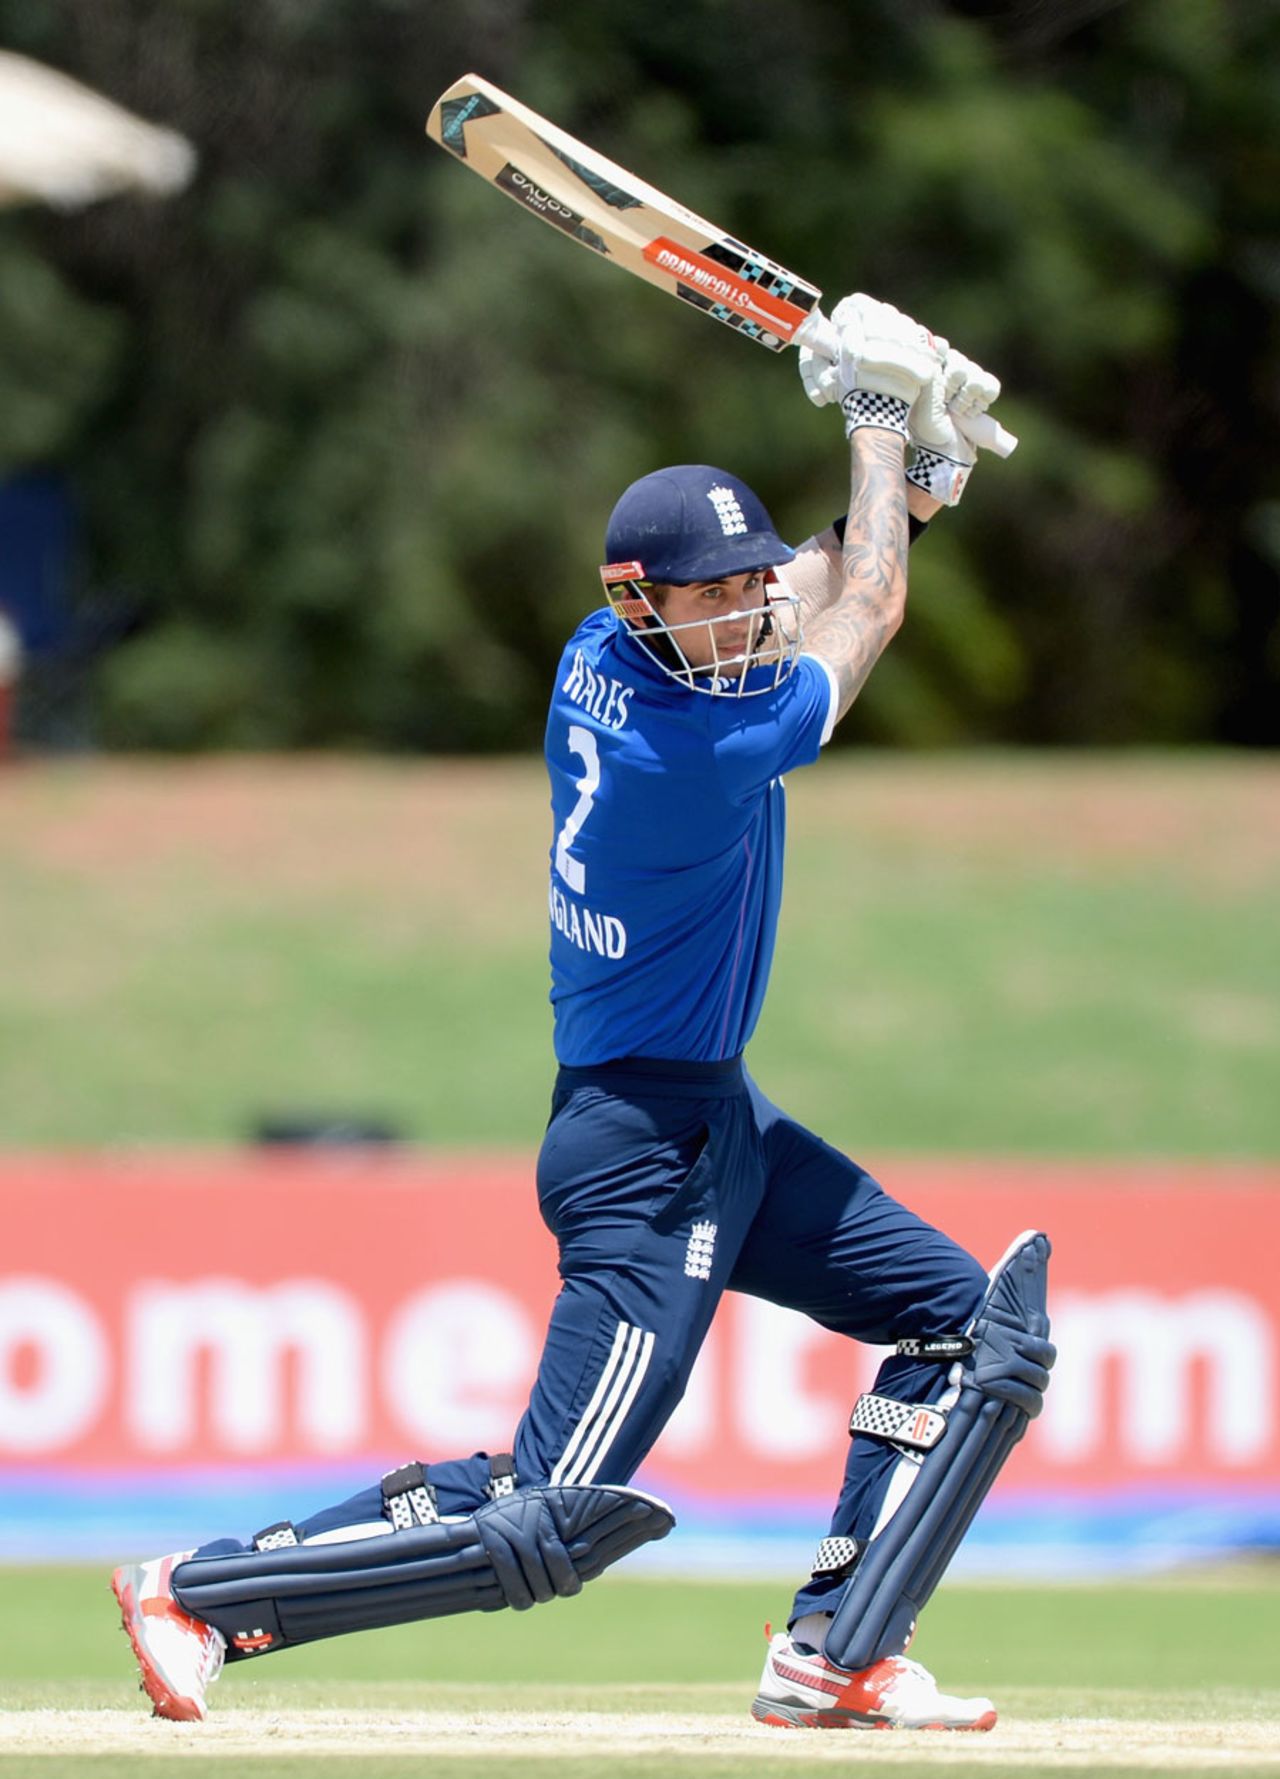 Alex Hales made 23 from 28 balls as his search for form continued, South Africa A v England Lions, Tour match, Kimberley, January 30, 2016